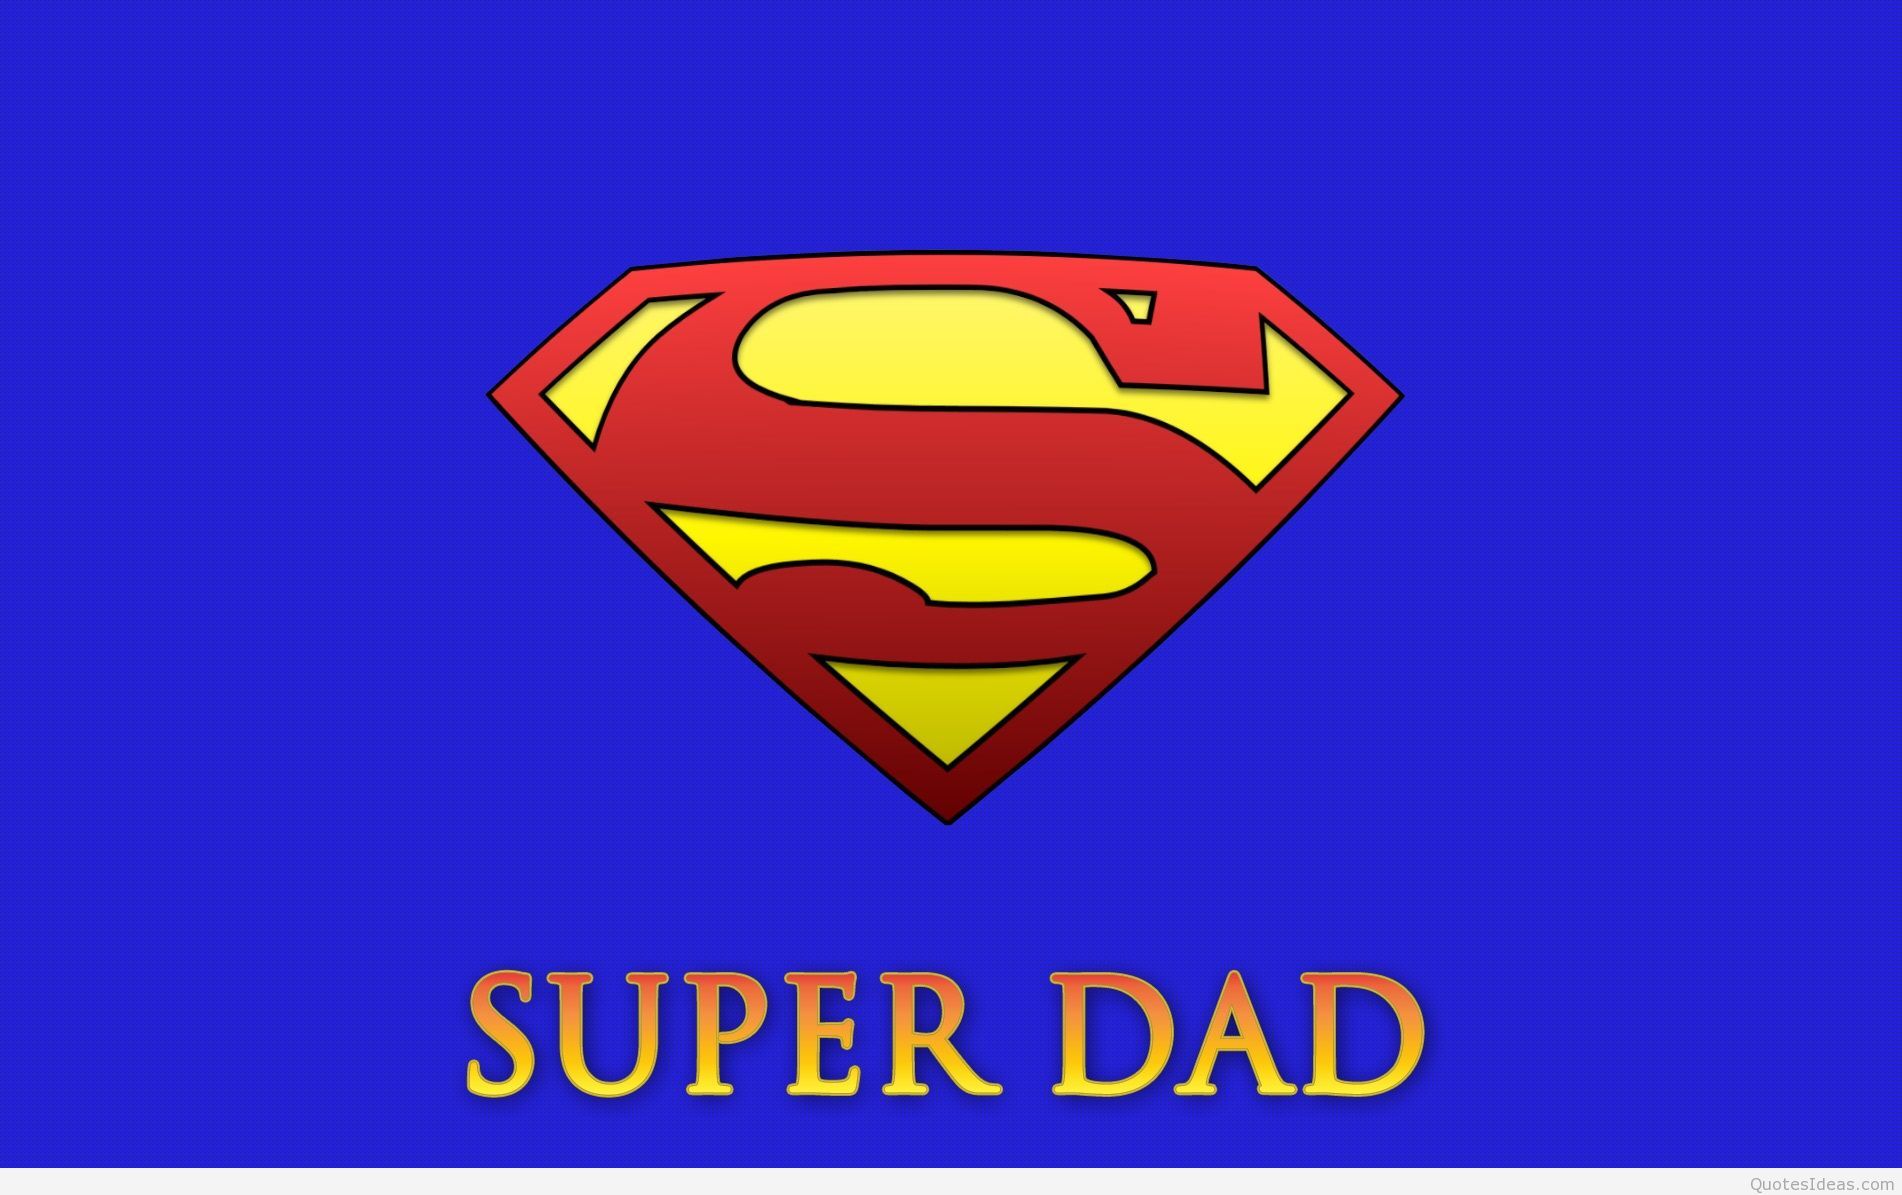 Cool Dad Wallpapers